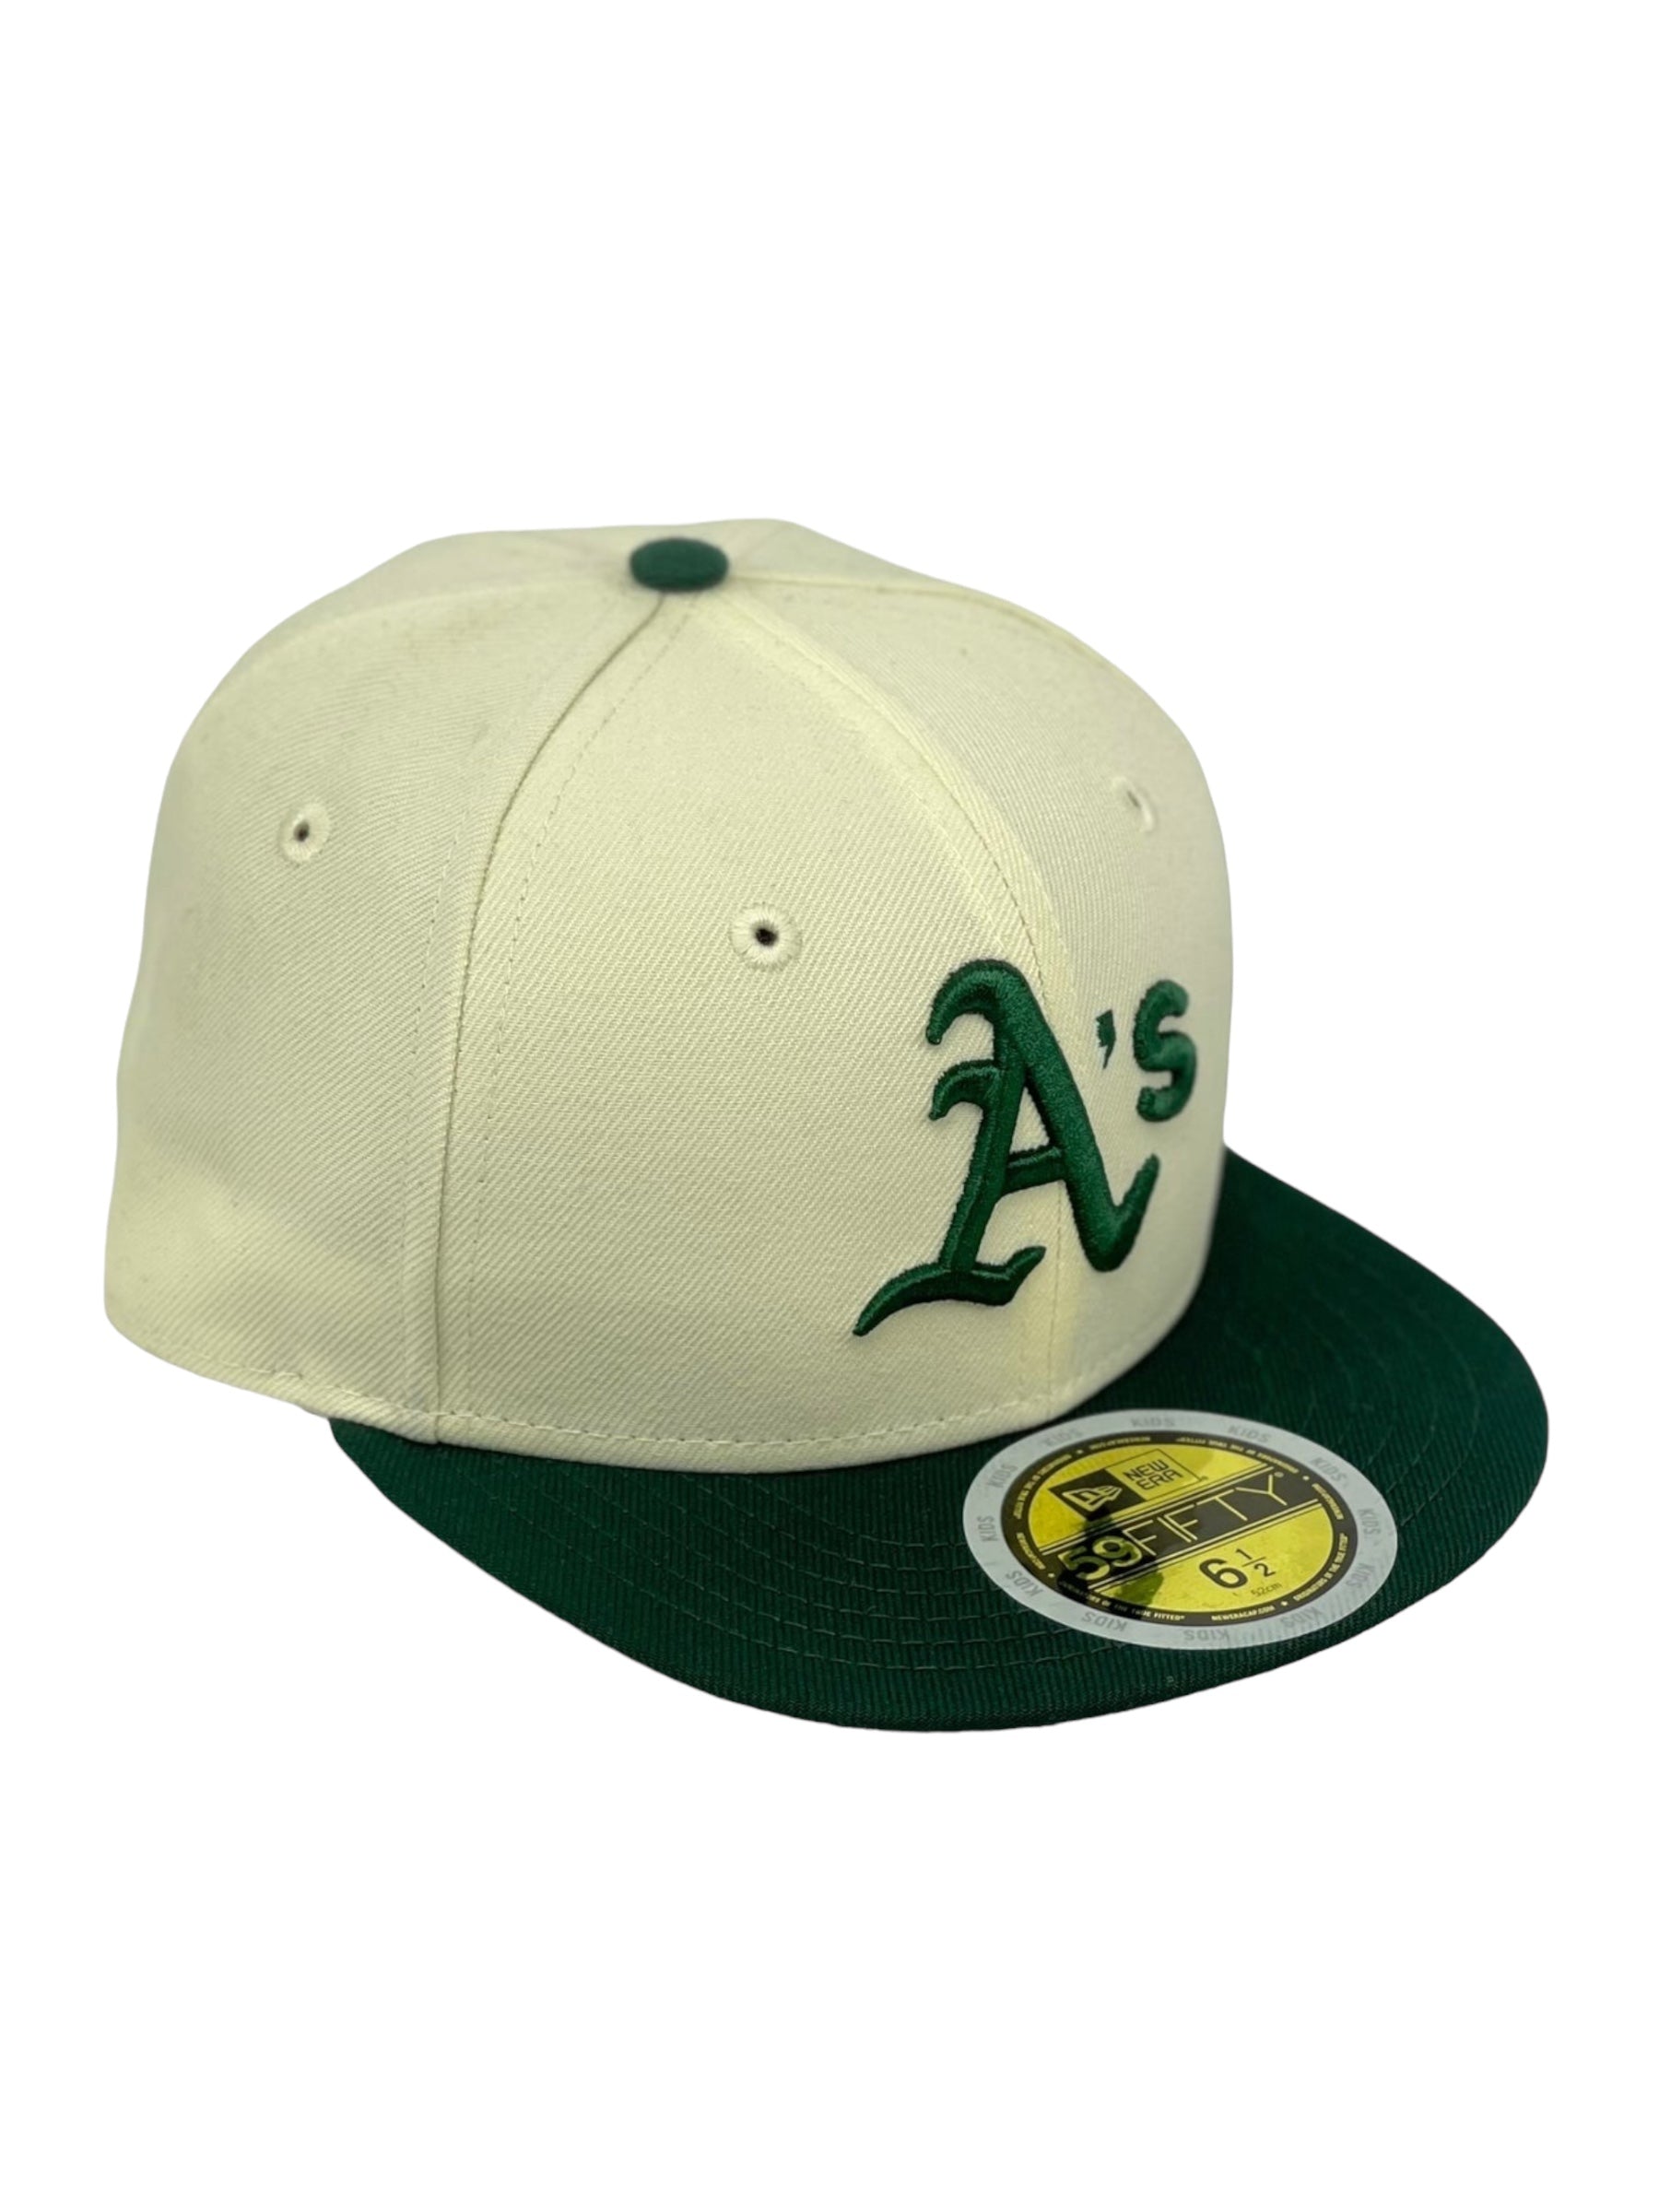 KIDS - OAKLAND ATHLETICS (OFF-WHITE) NEW ERA 59FIFTY FITTED